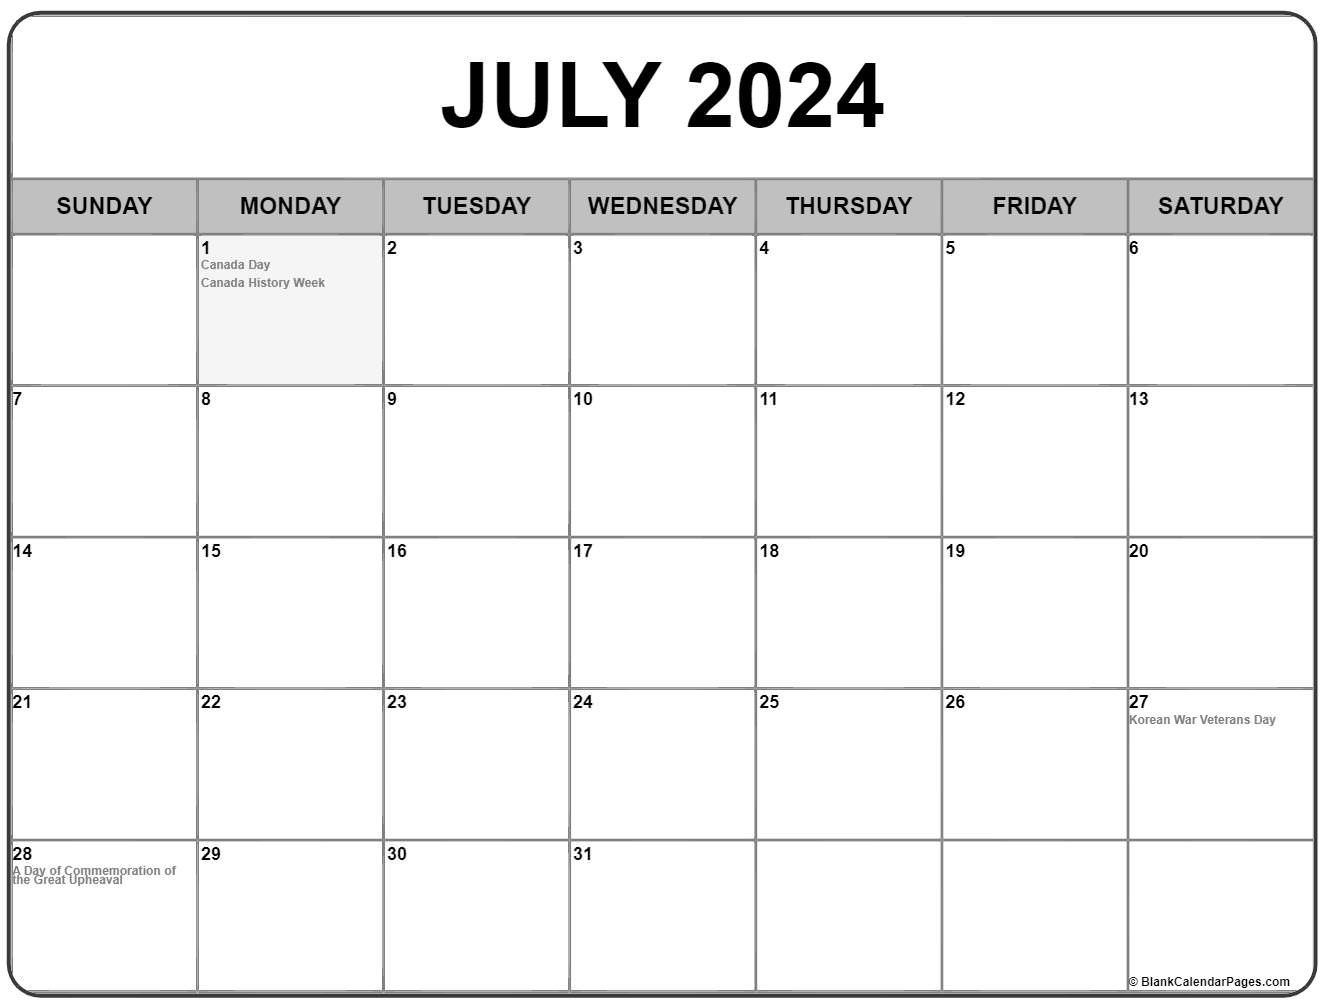 july-2020-calendar-with-holidays